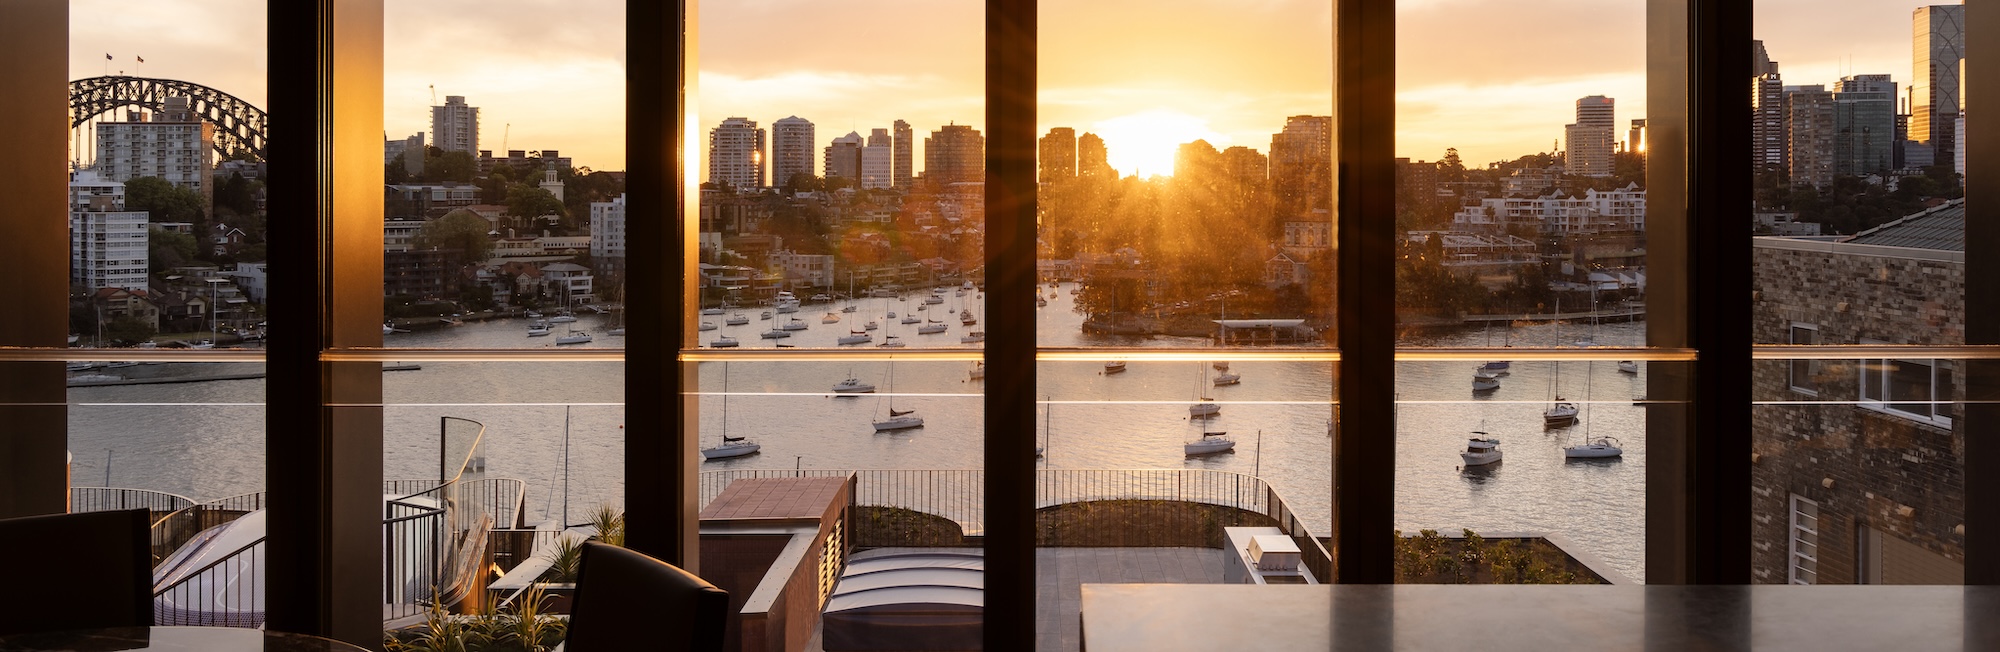 Exclusive penthouses offer front-row seats to Australia’s biggest icons